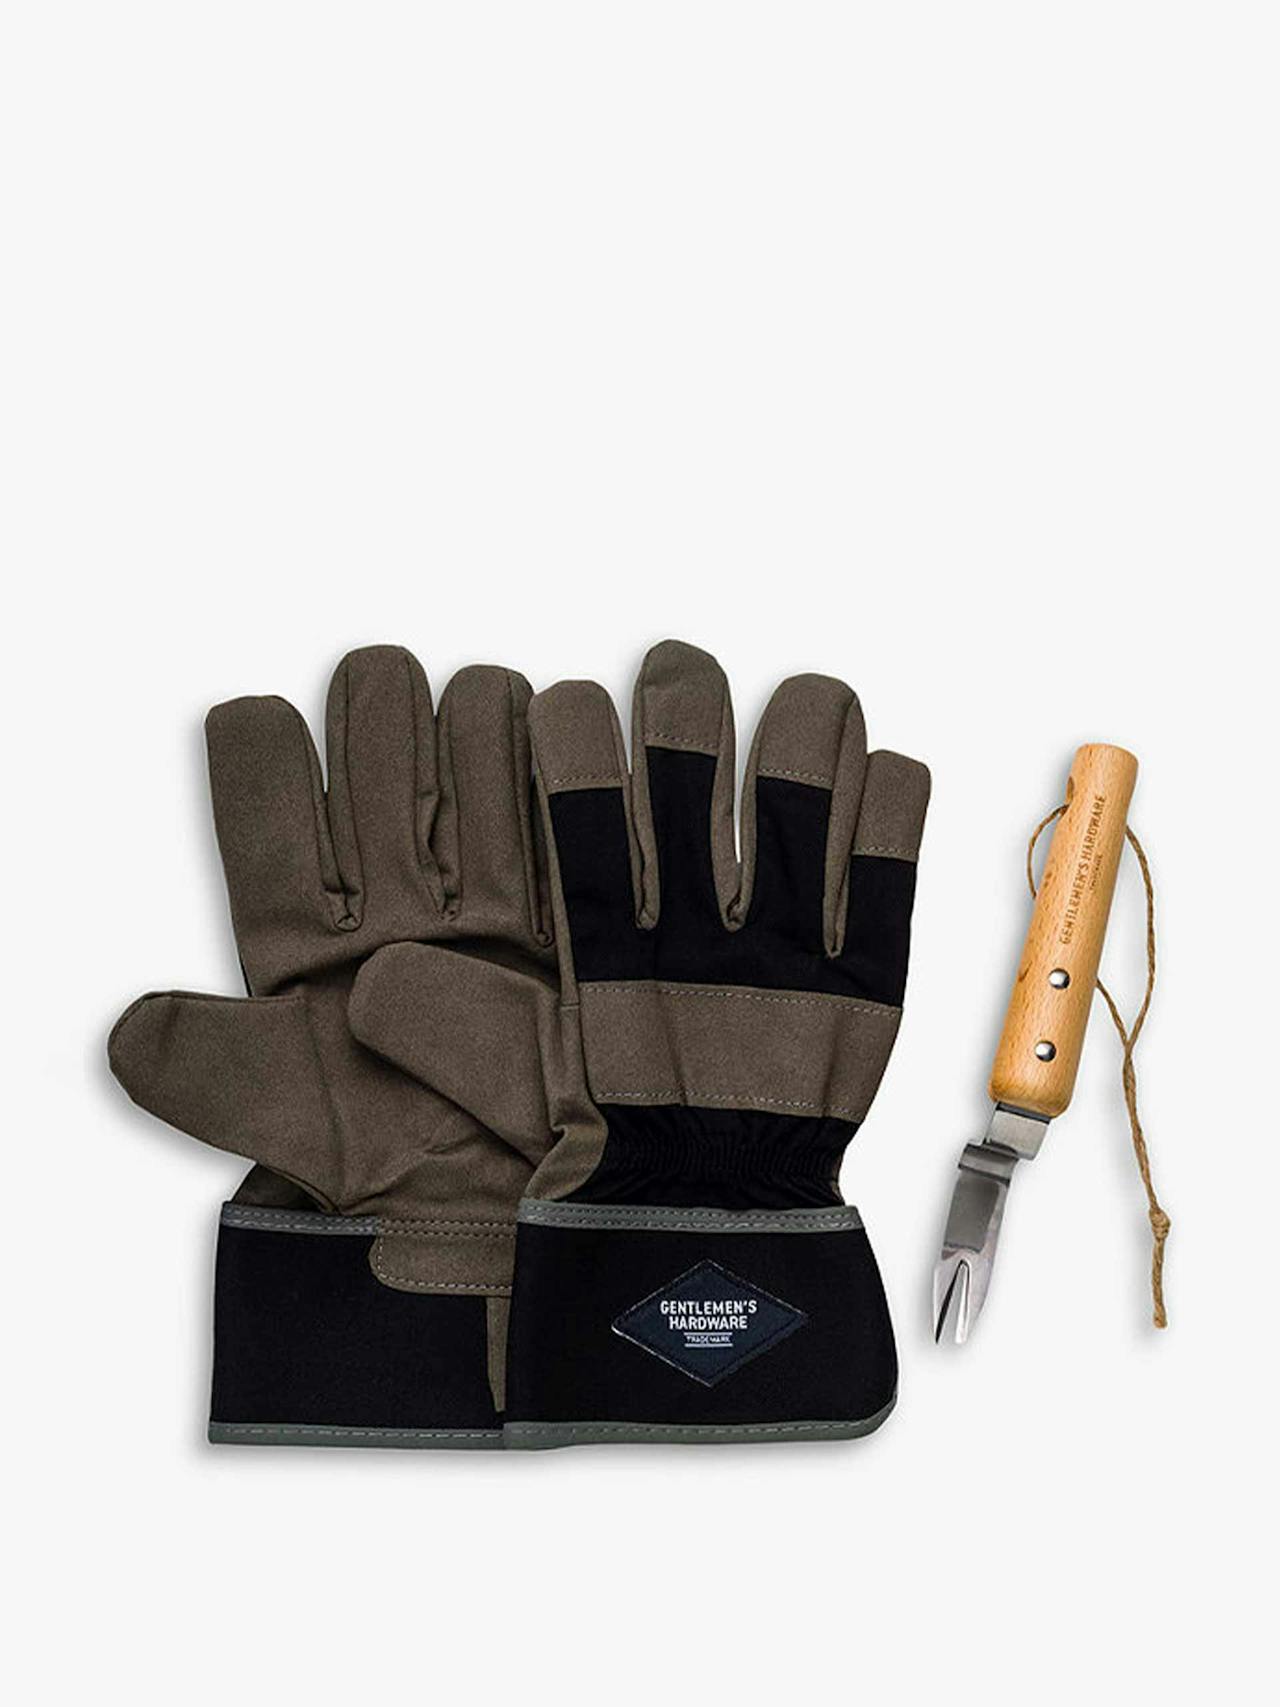 Brown gardening gloves and root lifter